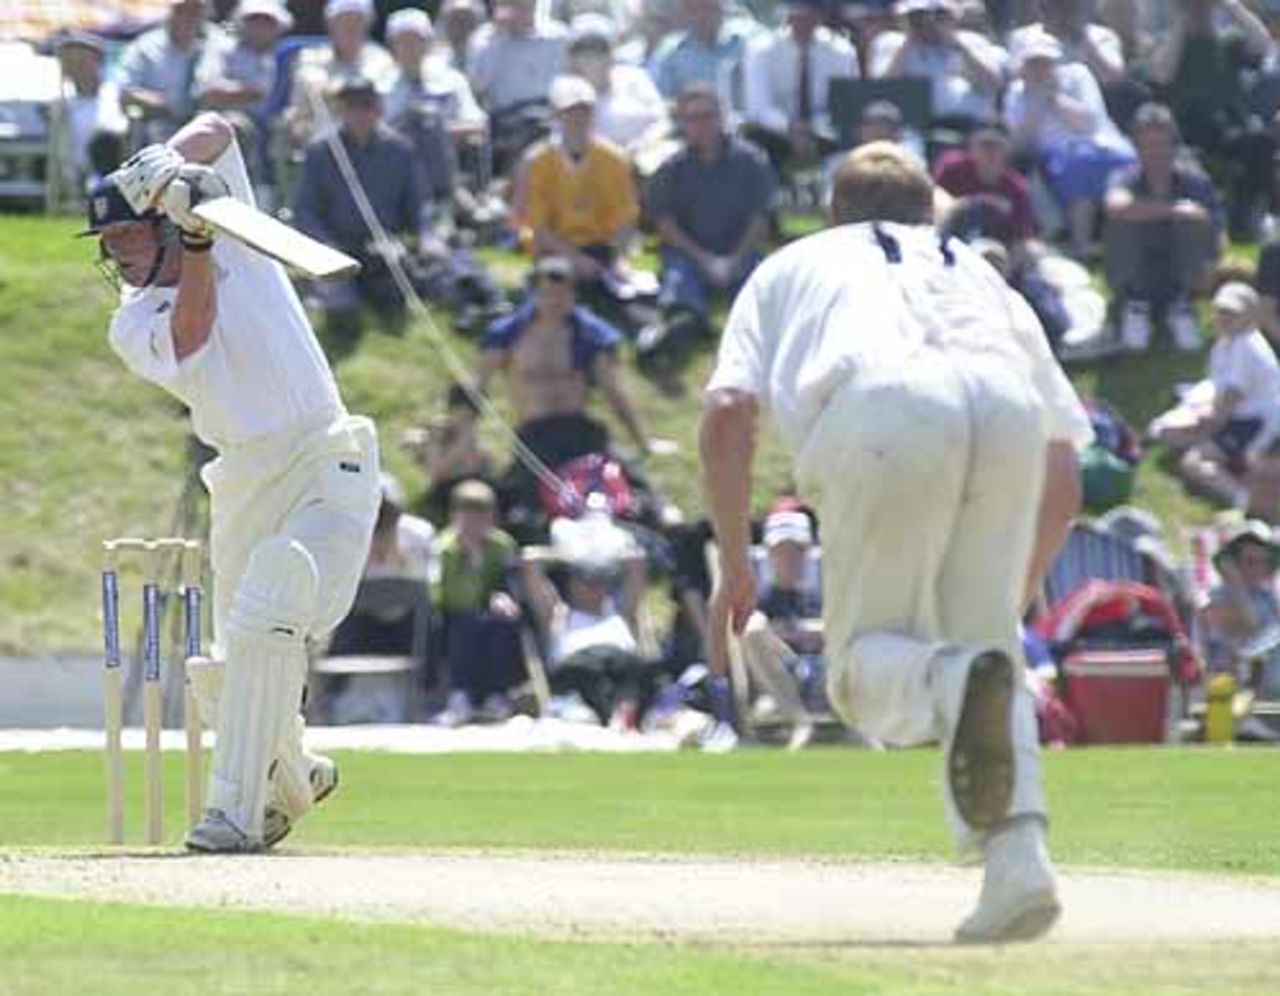 Paul Collingwood drives Flintoff throught the covers in his innings of 60, C+G Quarter Final, Blackpool, 25 Jul 2001